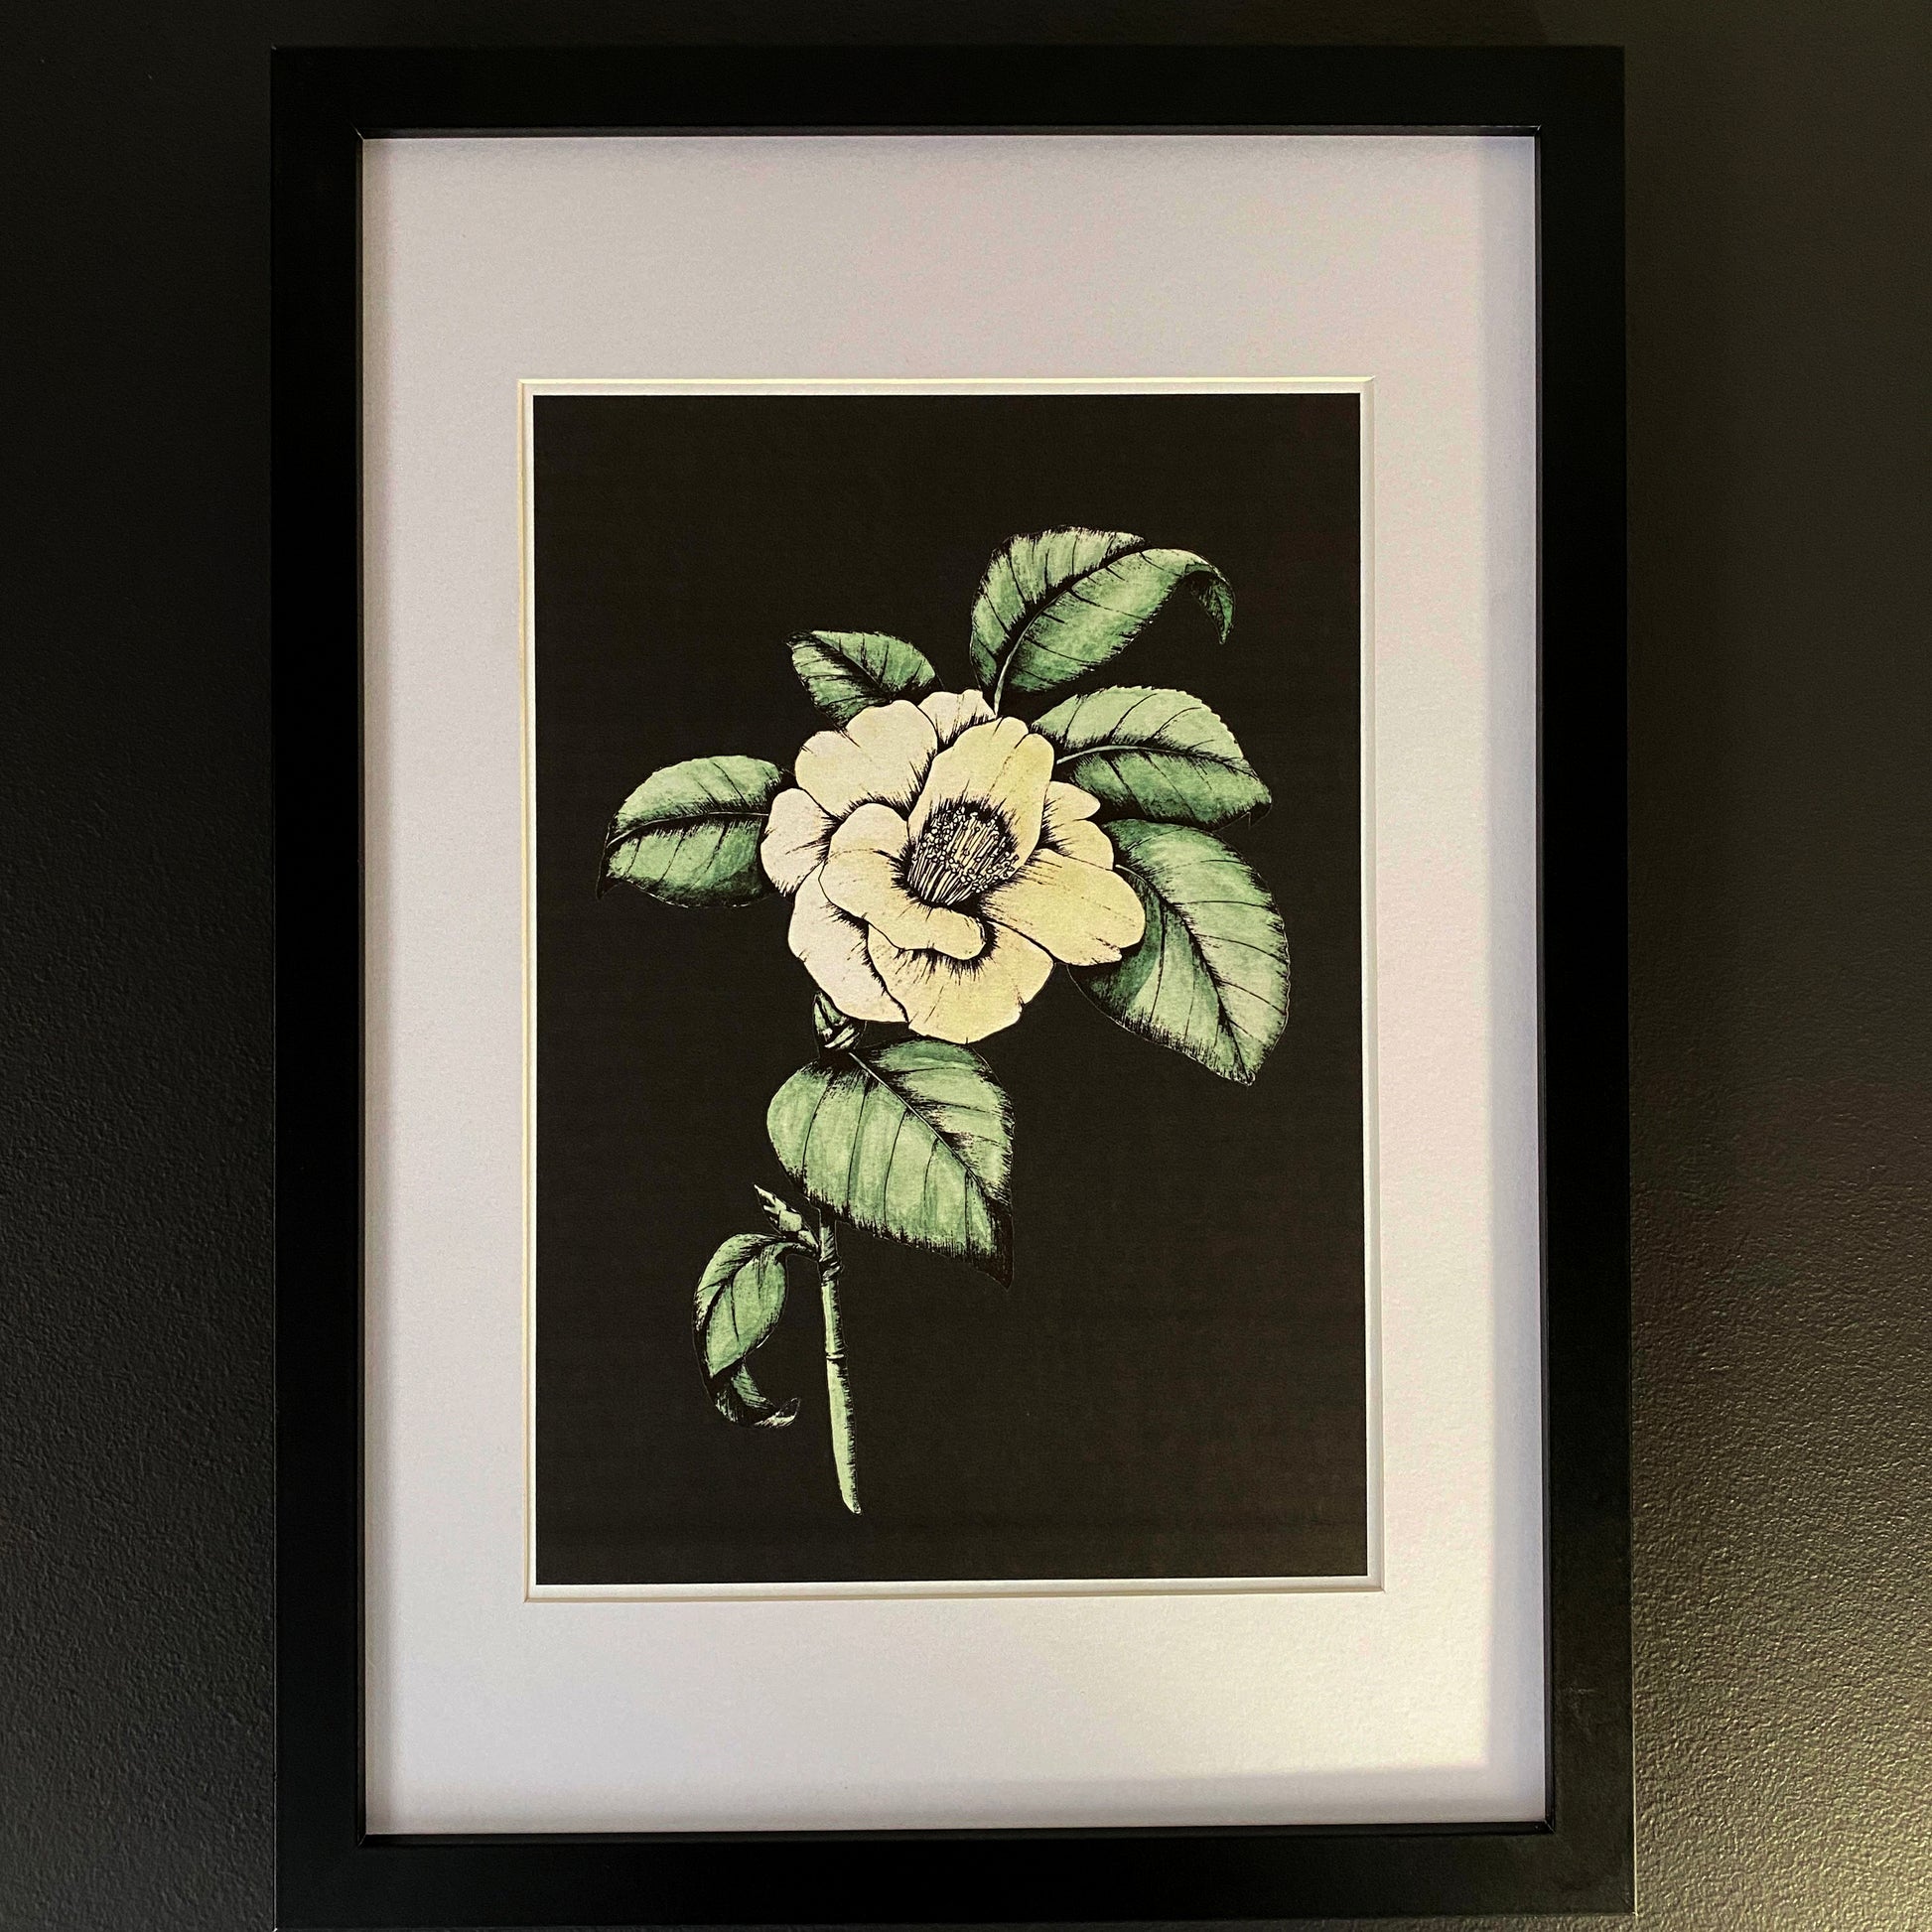 Camellia art print. Hand painted in watercolour using green and cream for the petals, this is a vintage style art print